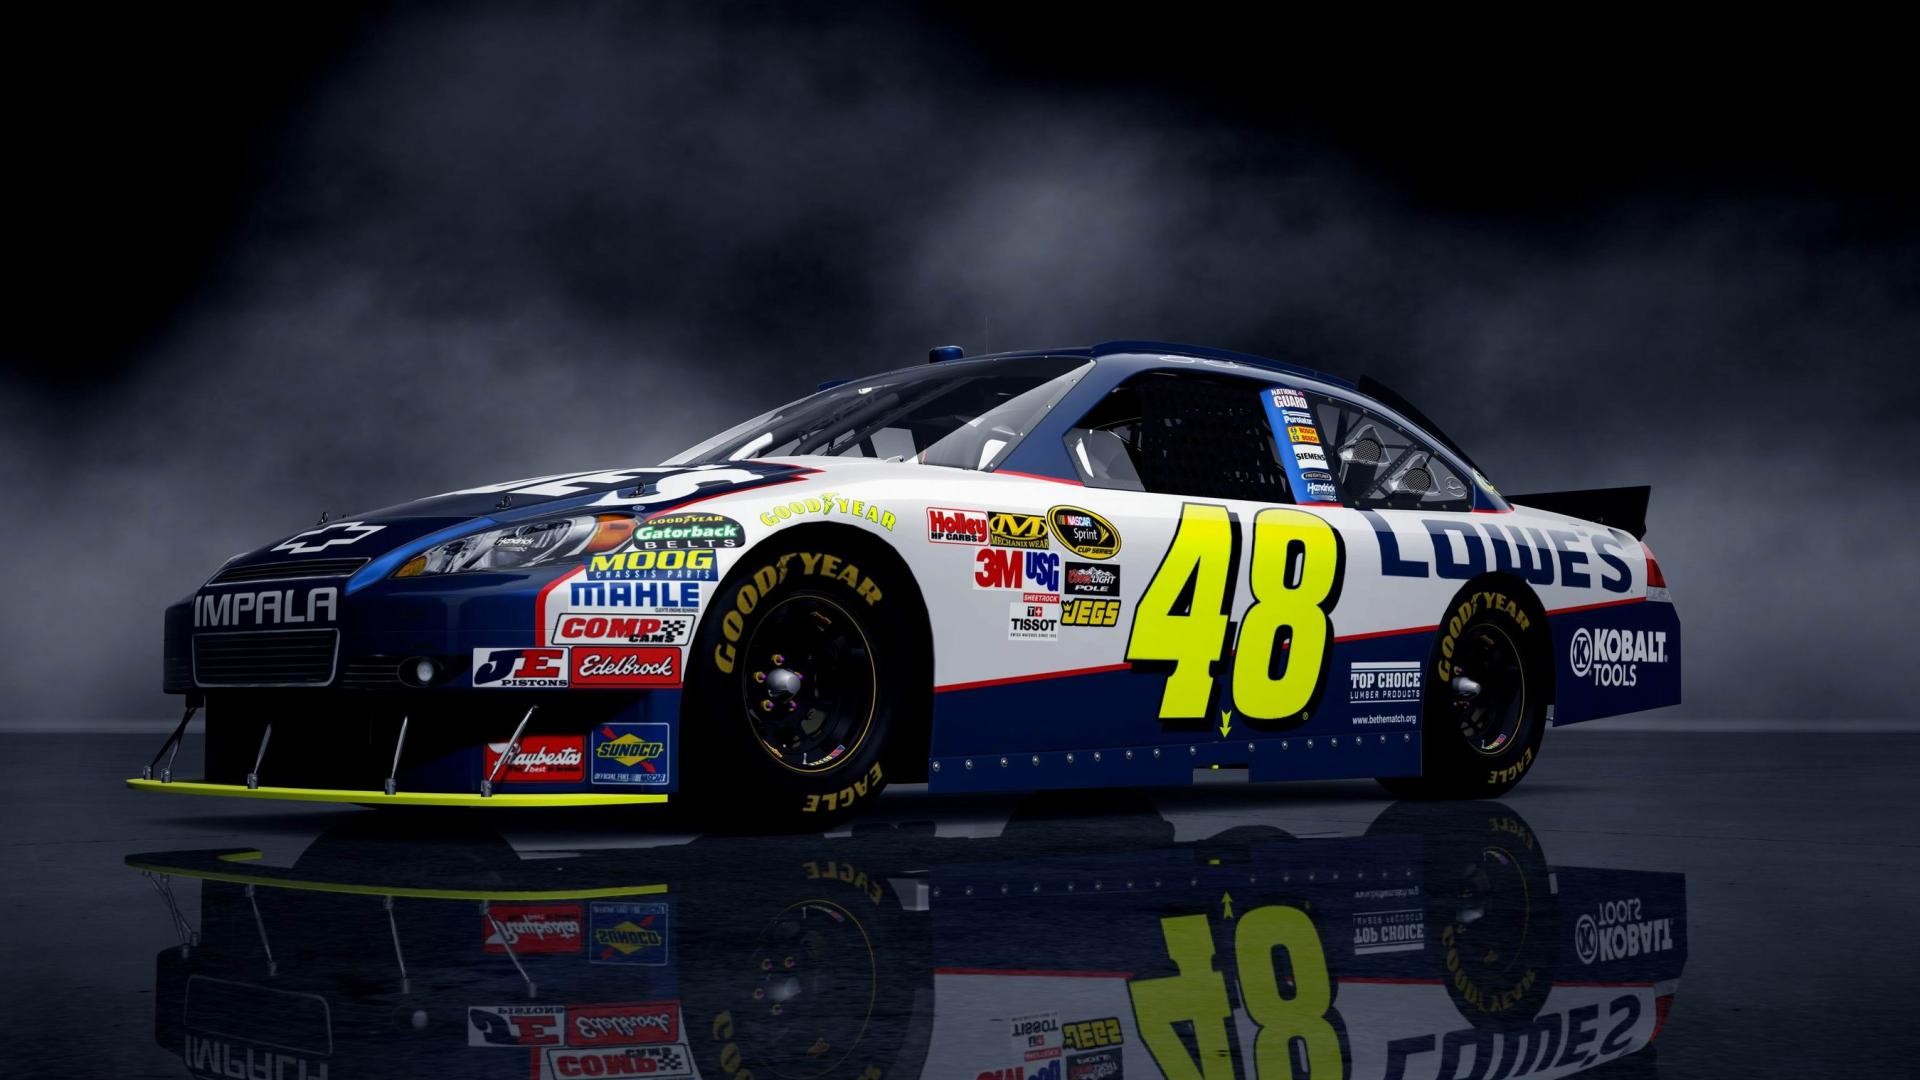 1920x1080 Nascar Hd Wallpapers Sports - Hd Wallpapers